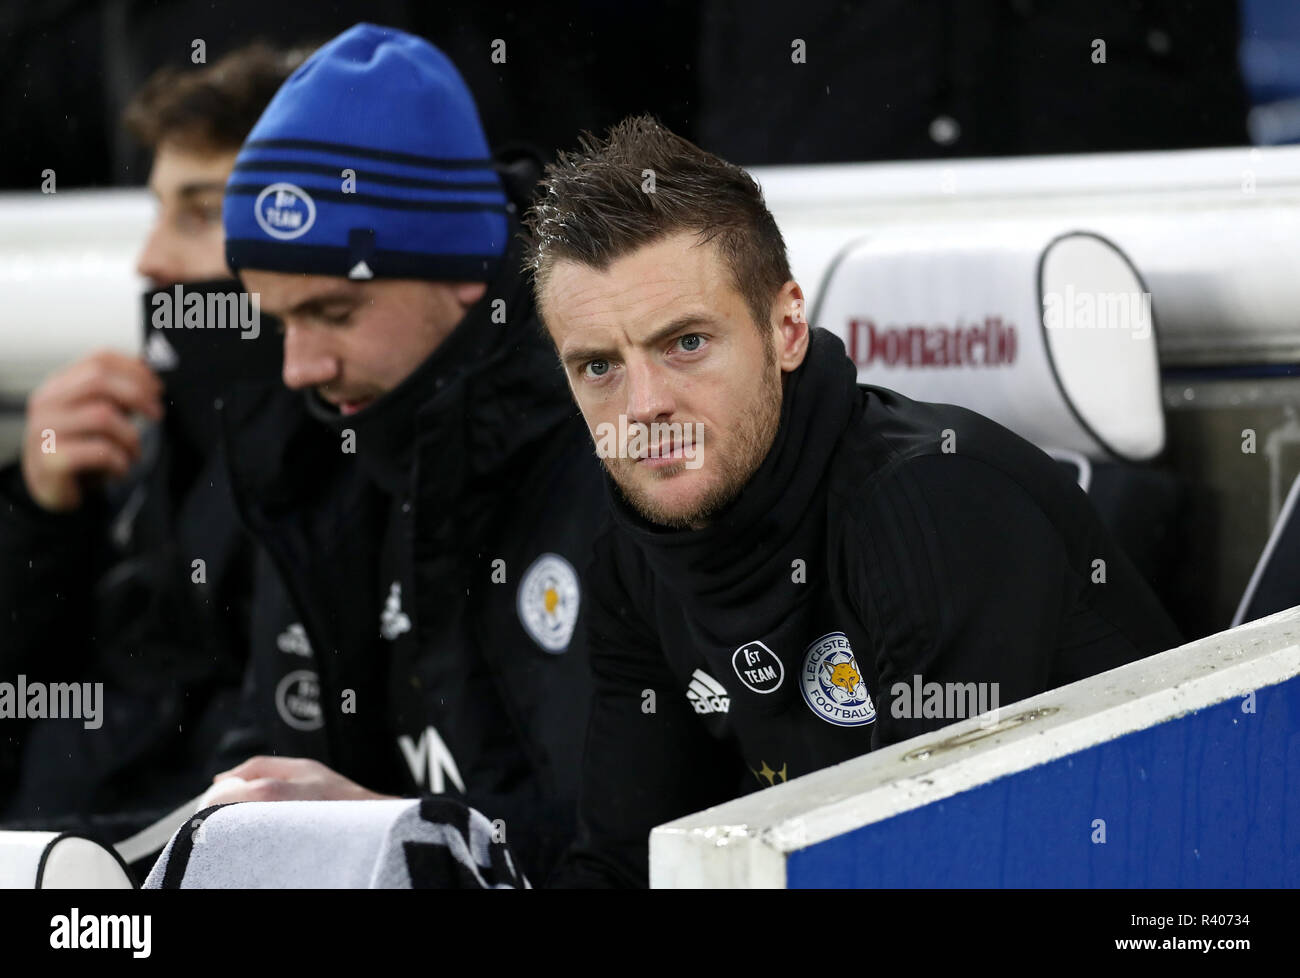 Leicester City's Jamie Vardy on the subsitute's bench before the Premier League match at The Amex Stadium, Brighton. PRESS ASSOCIATION Photo. Picture date: Saturday November 24, 2018. See PA story SOCCER Brighton. Photo credit should read: Gareth Fuller/PA Wire. RESTRICTIONS: No use with unauthorised audio, video, data, fixture lists, club/league logos or 'live' services. Online in-match use limited to 75 images, no video emulation. No use in betting, games or single club/league/player publications. Stock Photo